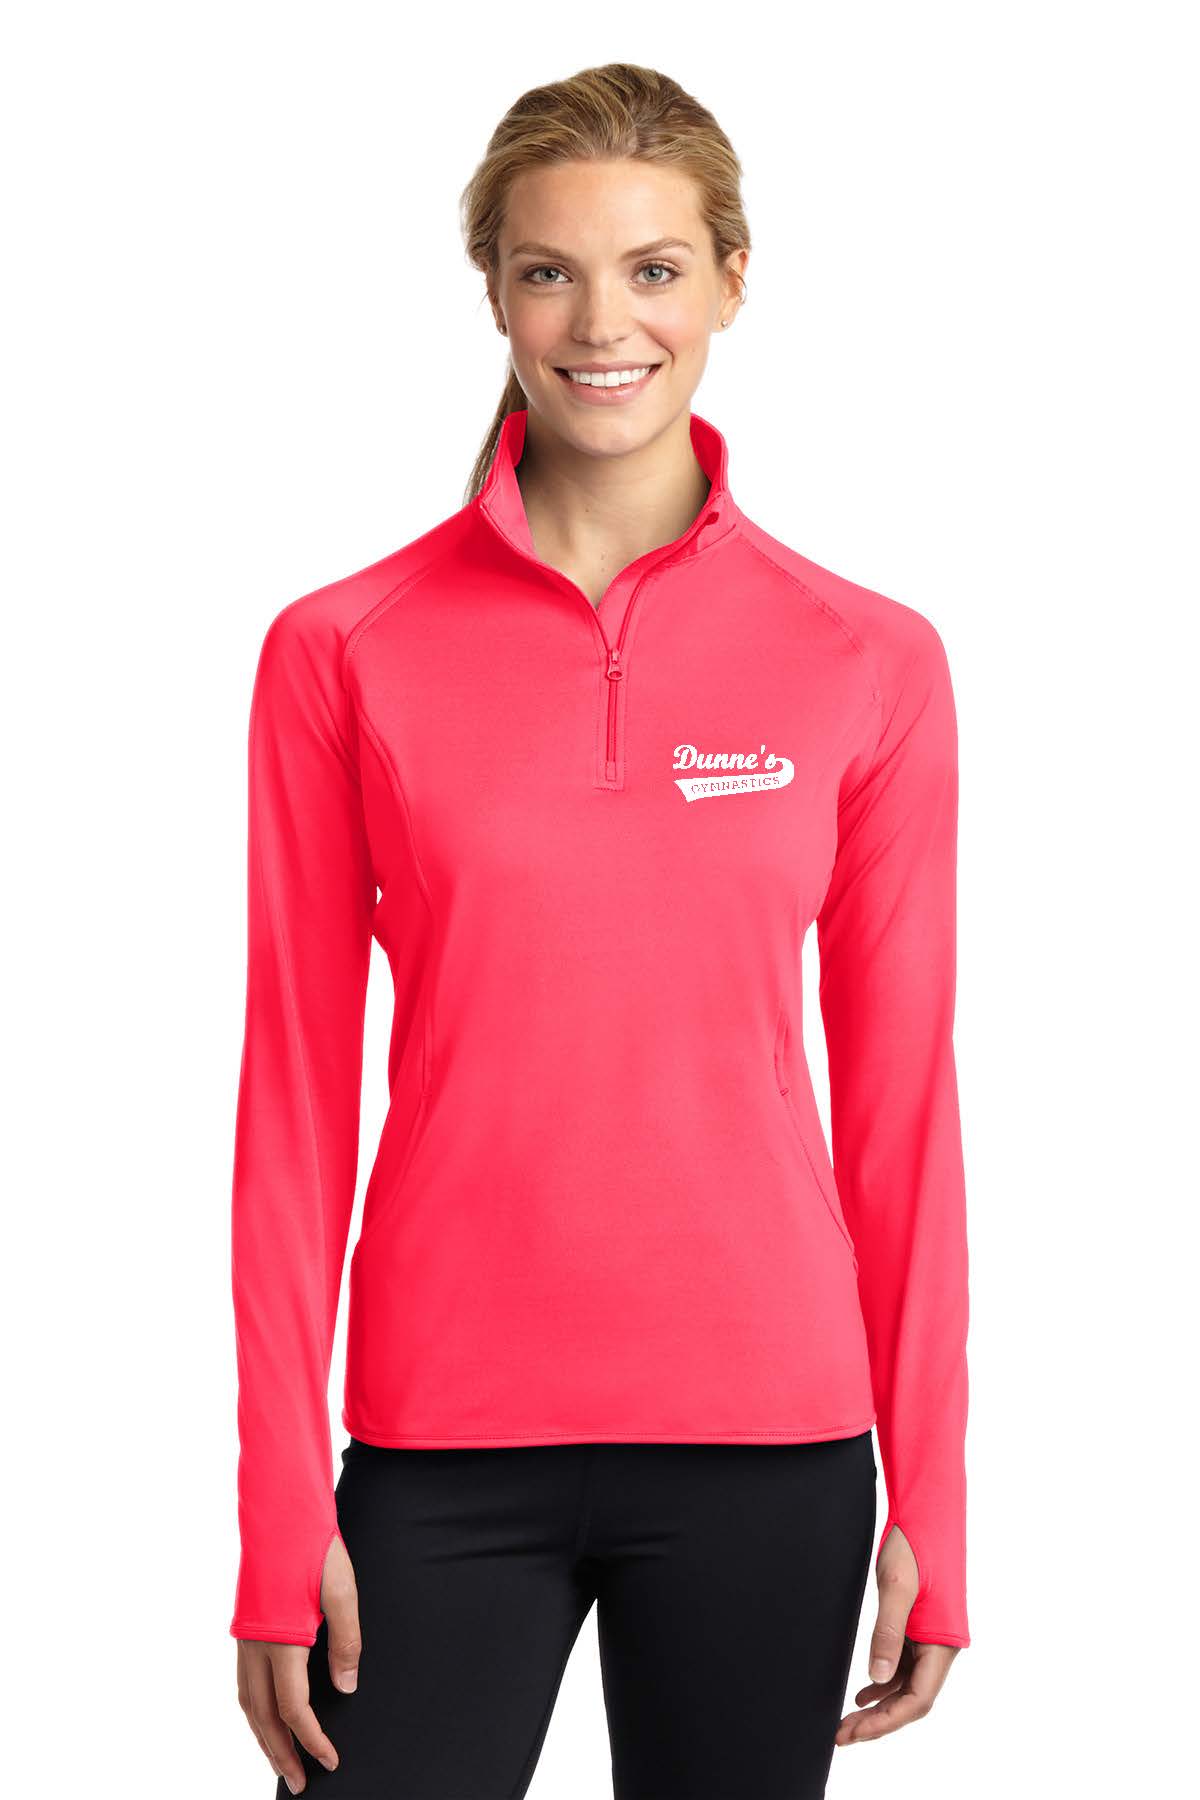 Ladies 1/2-Zip Pullover with Dunne's Logo